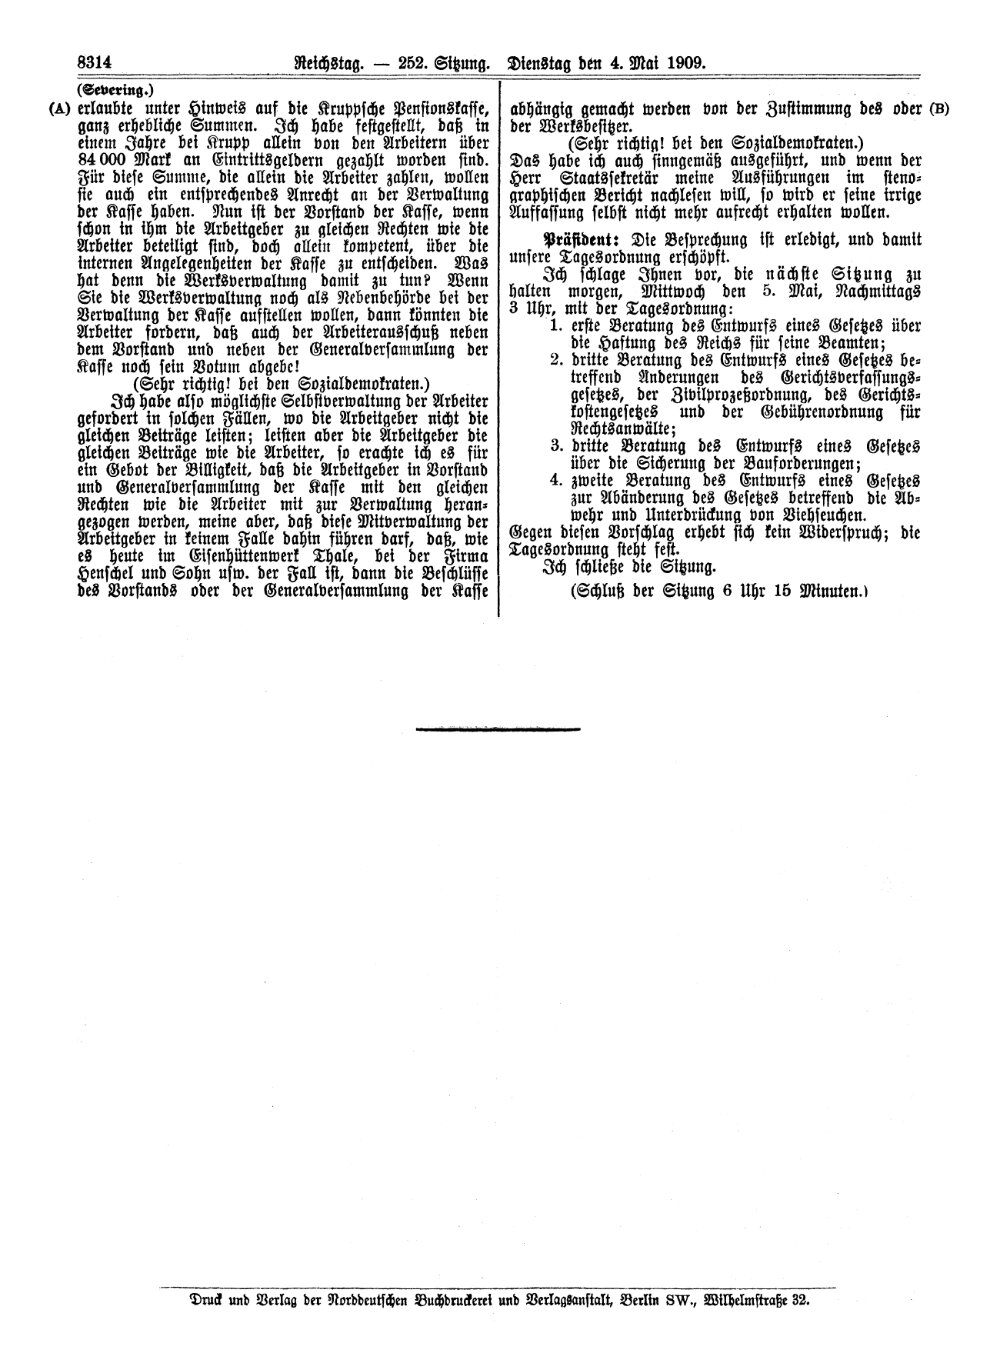 Scan of page 8314